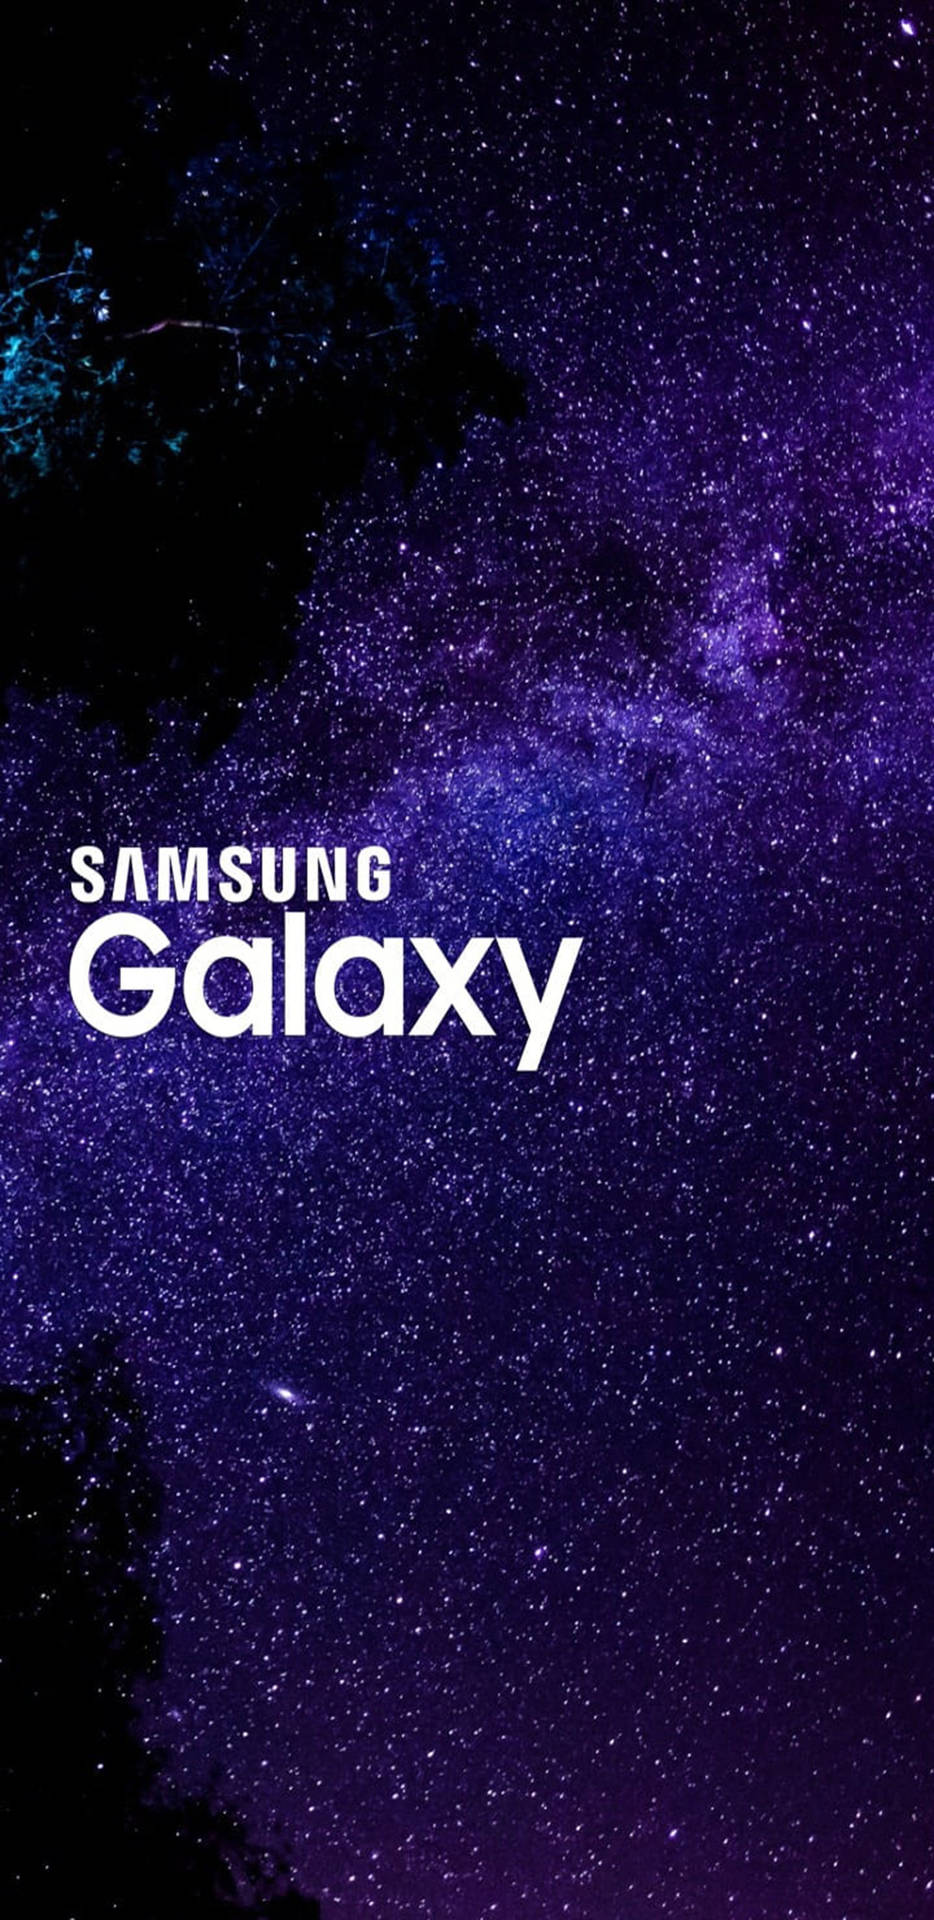 Samsung Galaxy Pictures Wallpaper